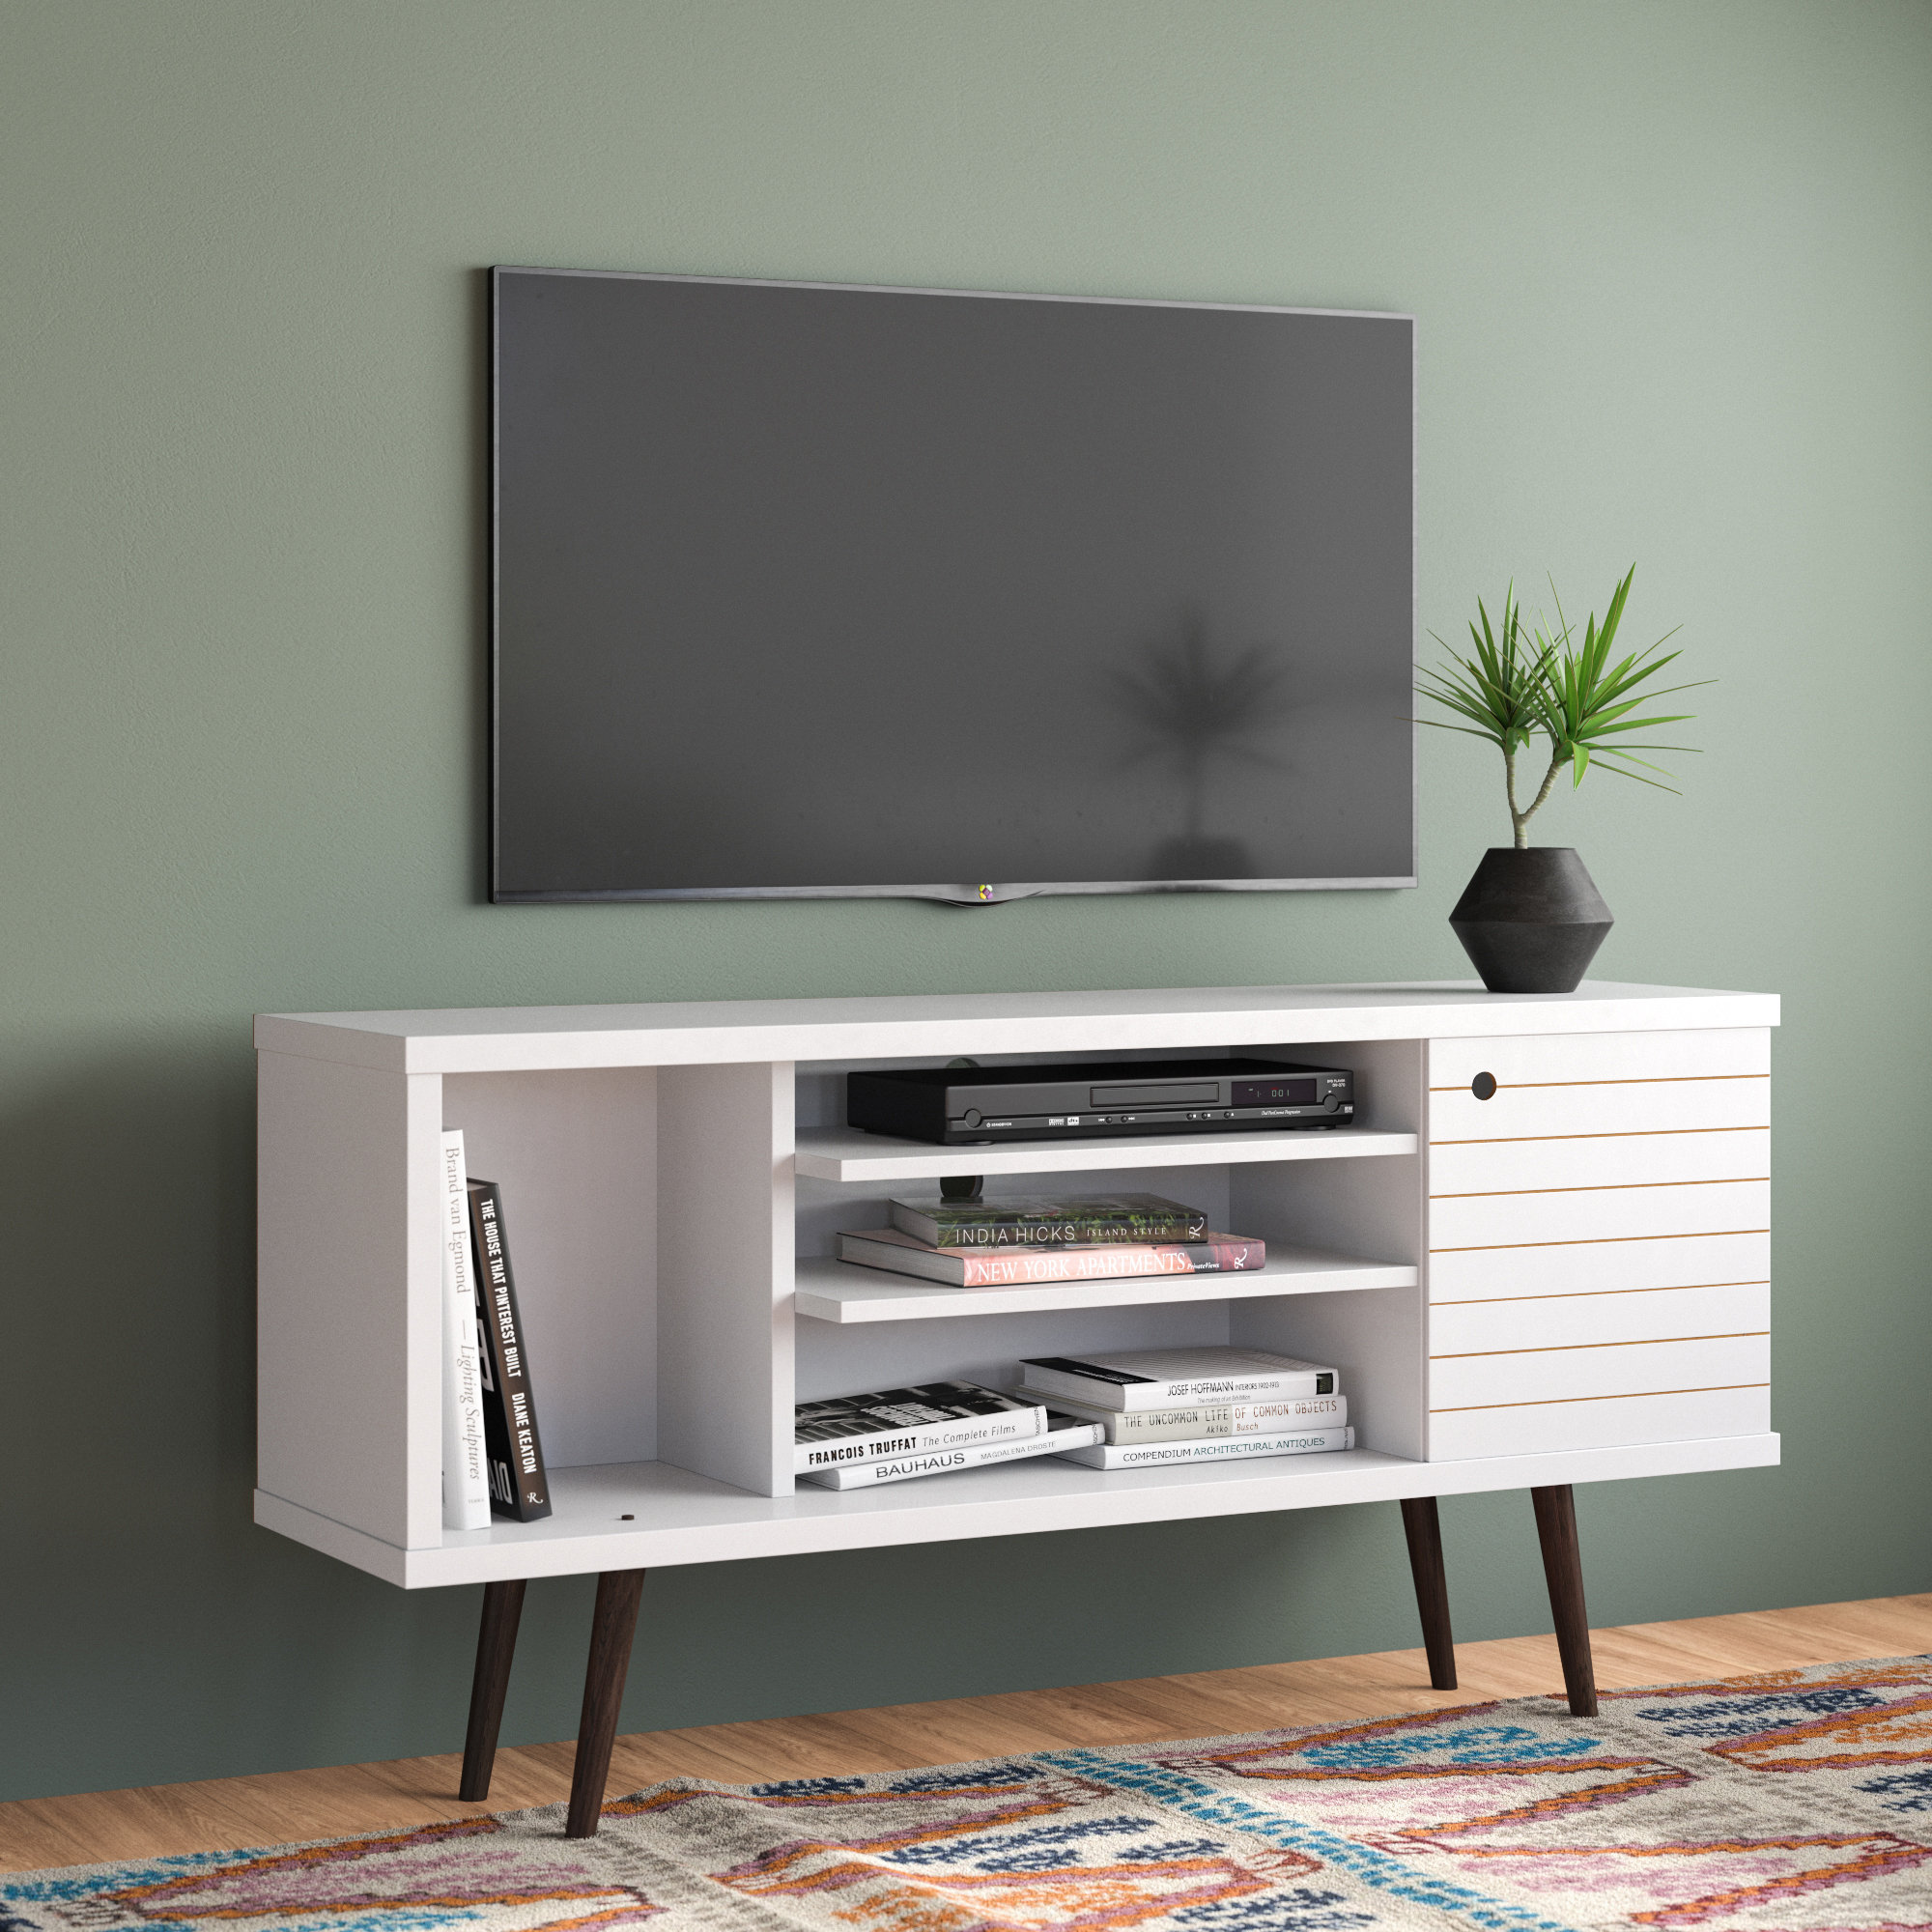 Allegra Tv Stand For Tvs Up To 65 Reviews Allmodern